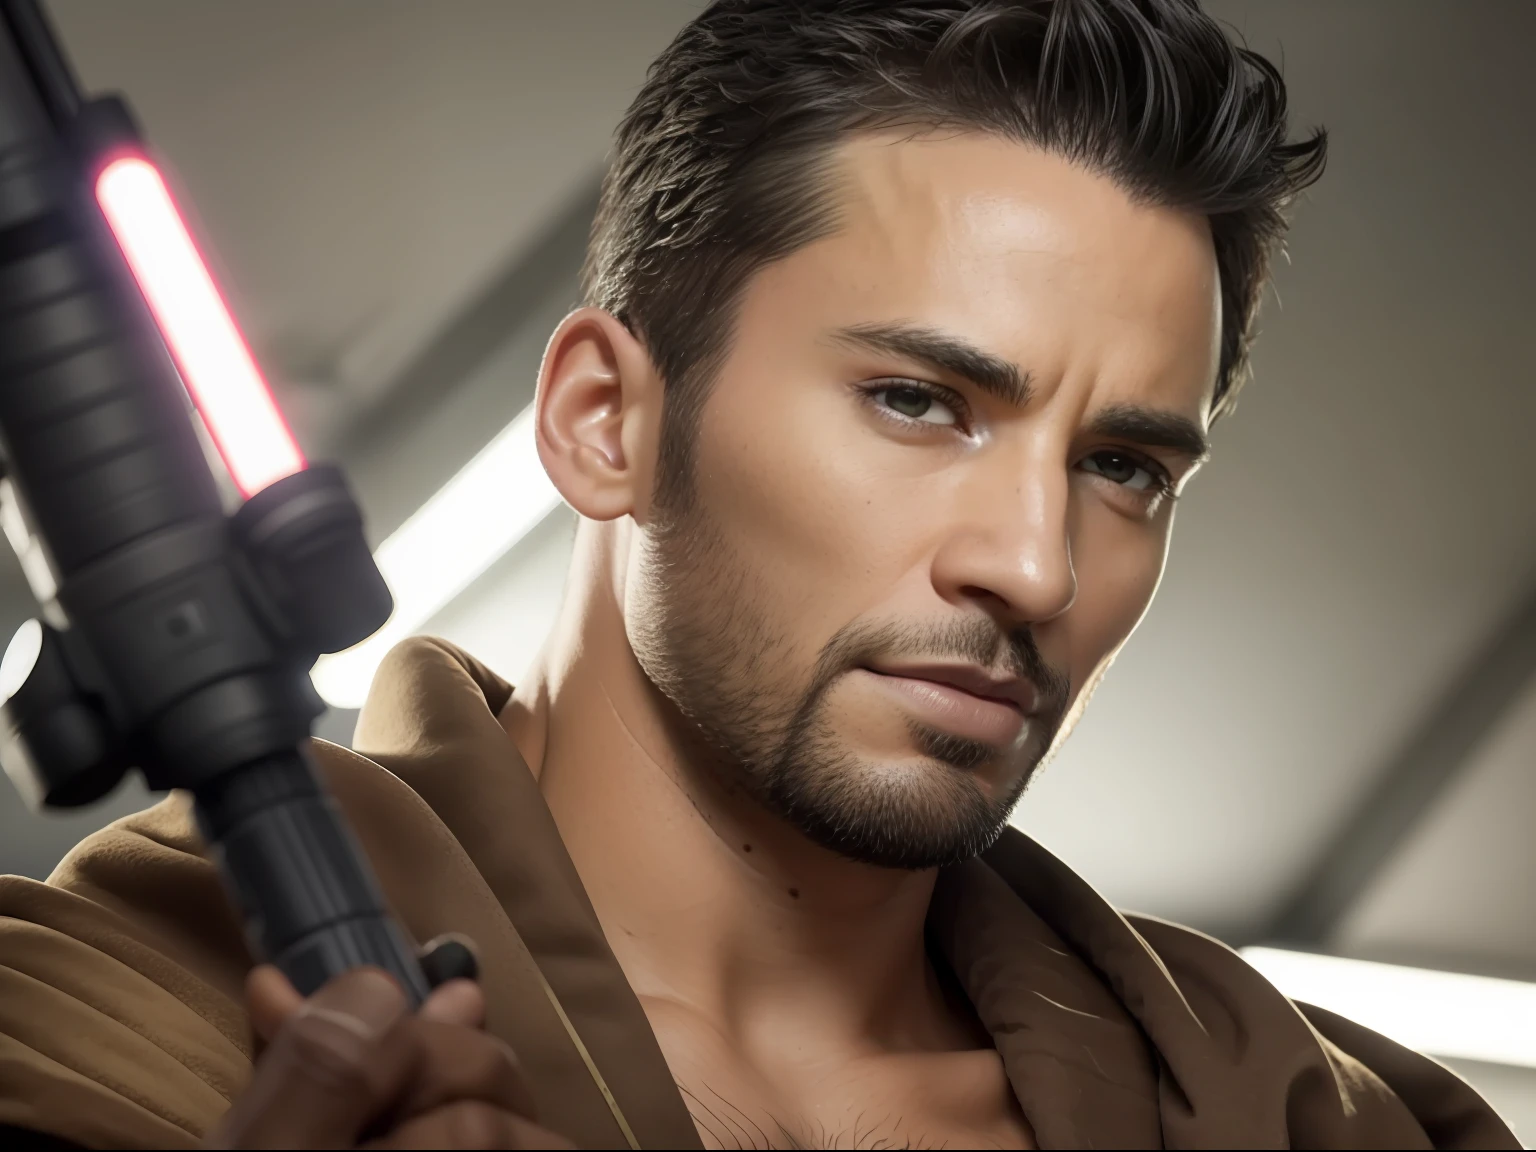 Create a man, star wars character, Hold your lightsaber in front of your face, 30 age old，Weight 70 lbs，dark-skin，Wearing a light-colored robe, Wear black earrings, Curly and very short, The sides are slightly shaved, Brown eyes, Mysterious eyes, Detailed anatomy, Photo, Realistic, Cinematic, Glamour, On an alien planet